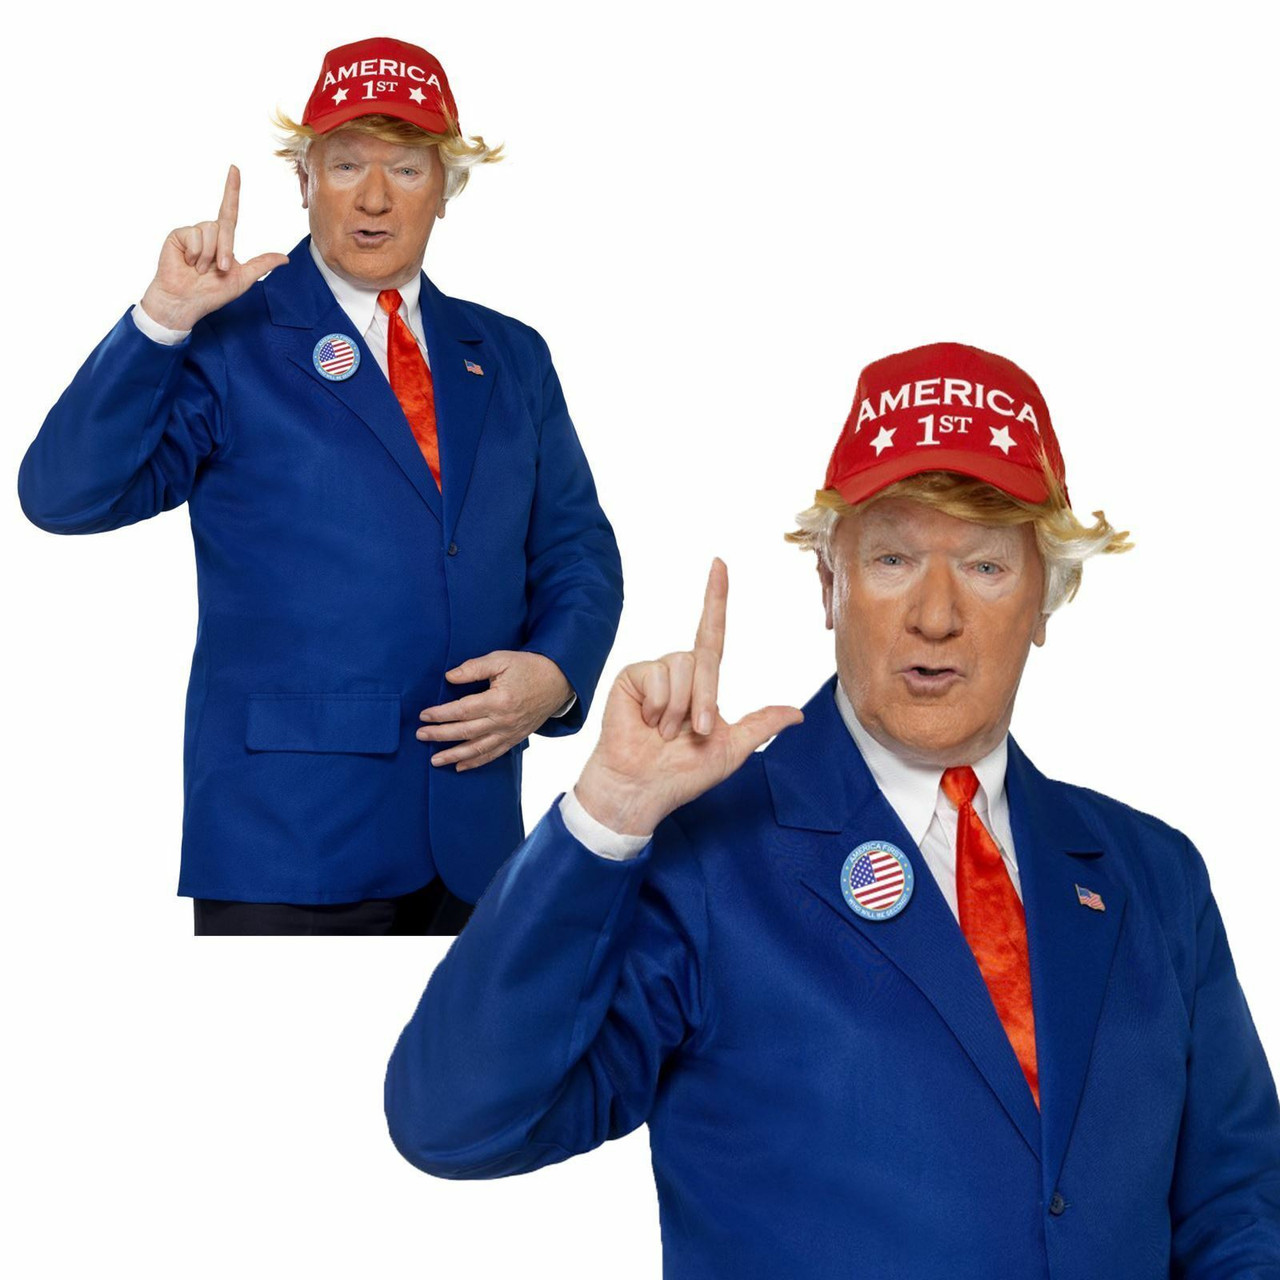 Adult Mens Novelty USA American President Donald Trump Suit Costume